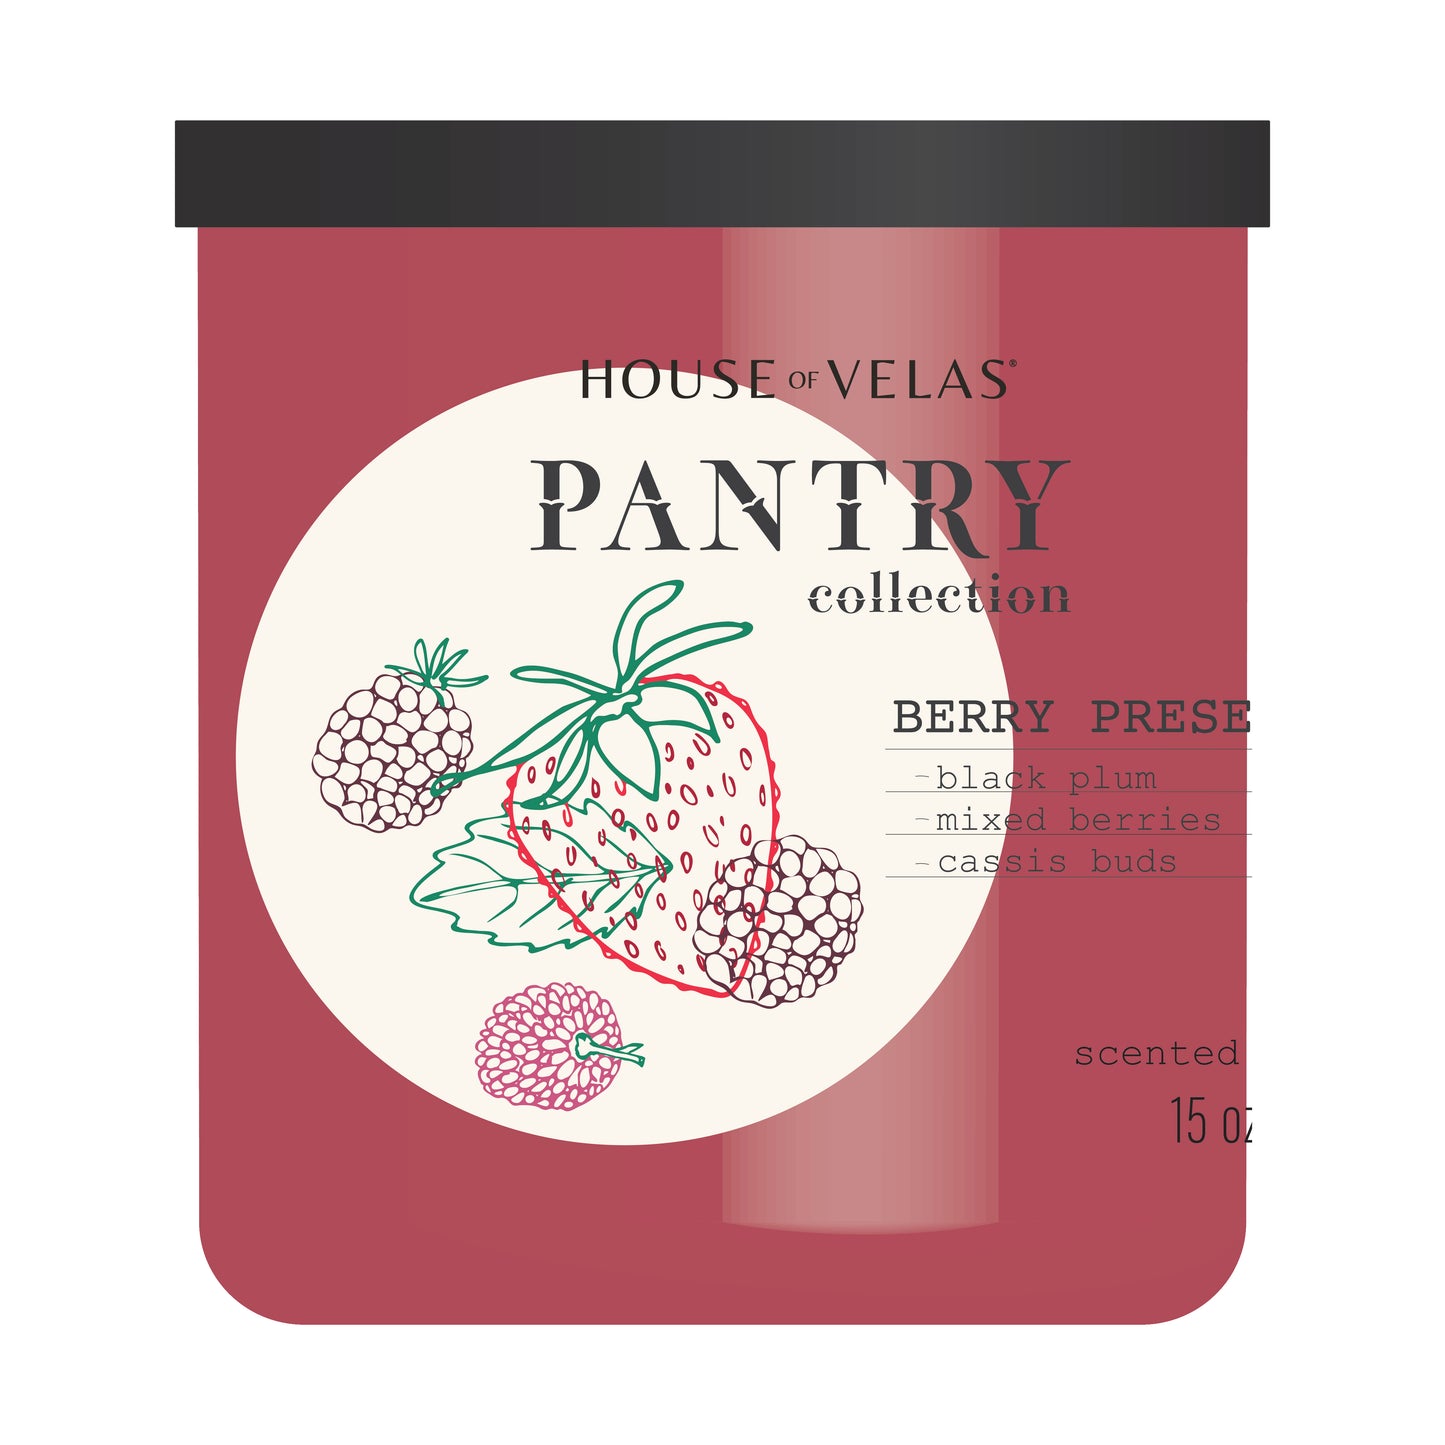 Pantry by House of Velas - Painted Glass 15 oz Scented Wax, Berry Preserves